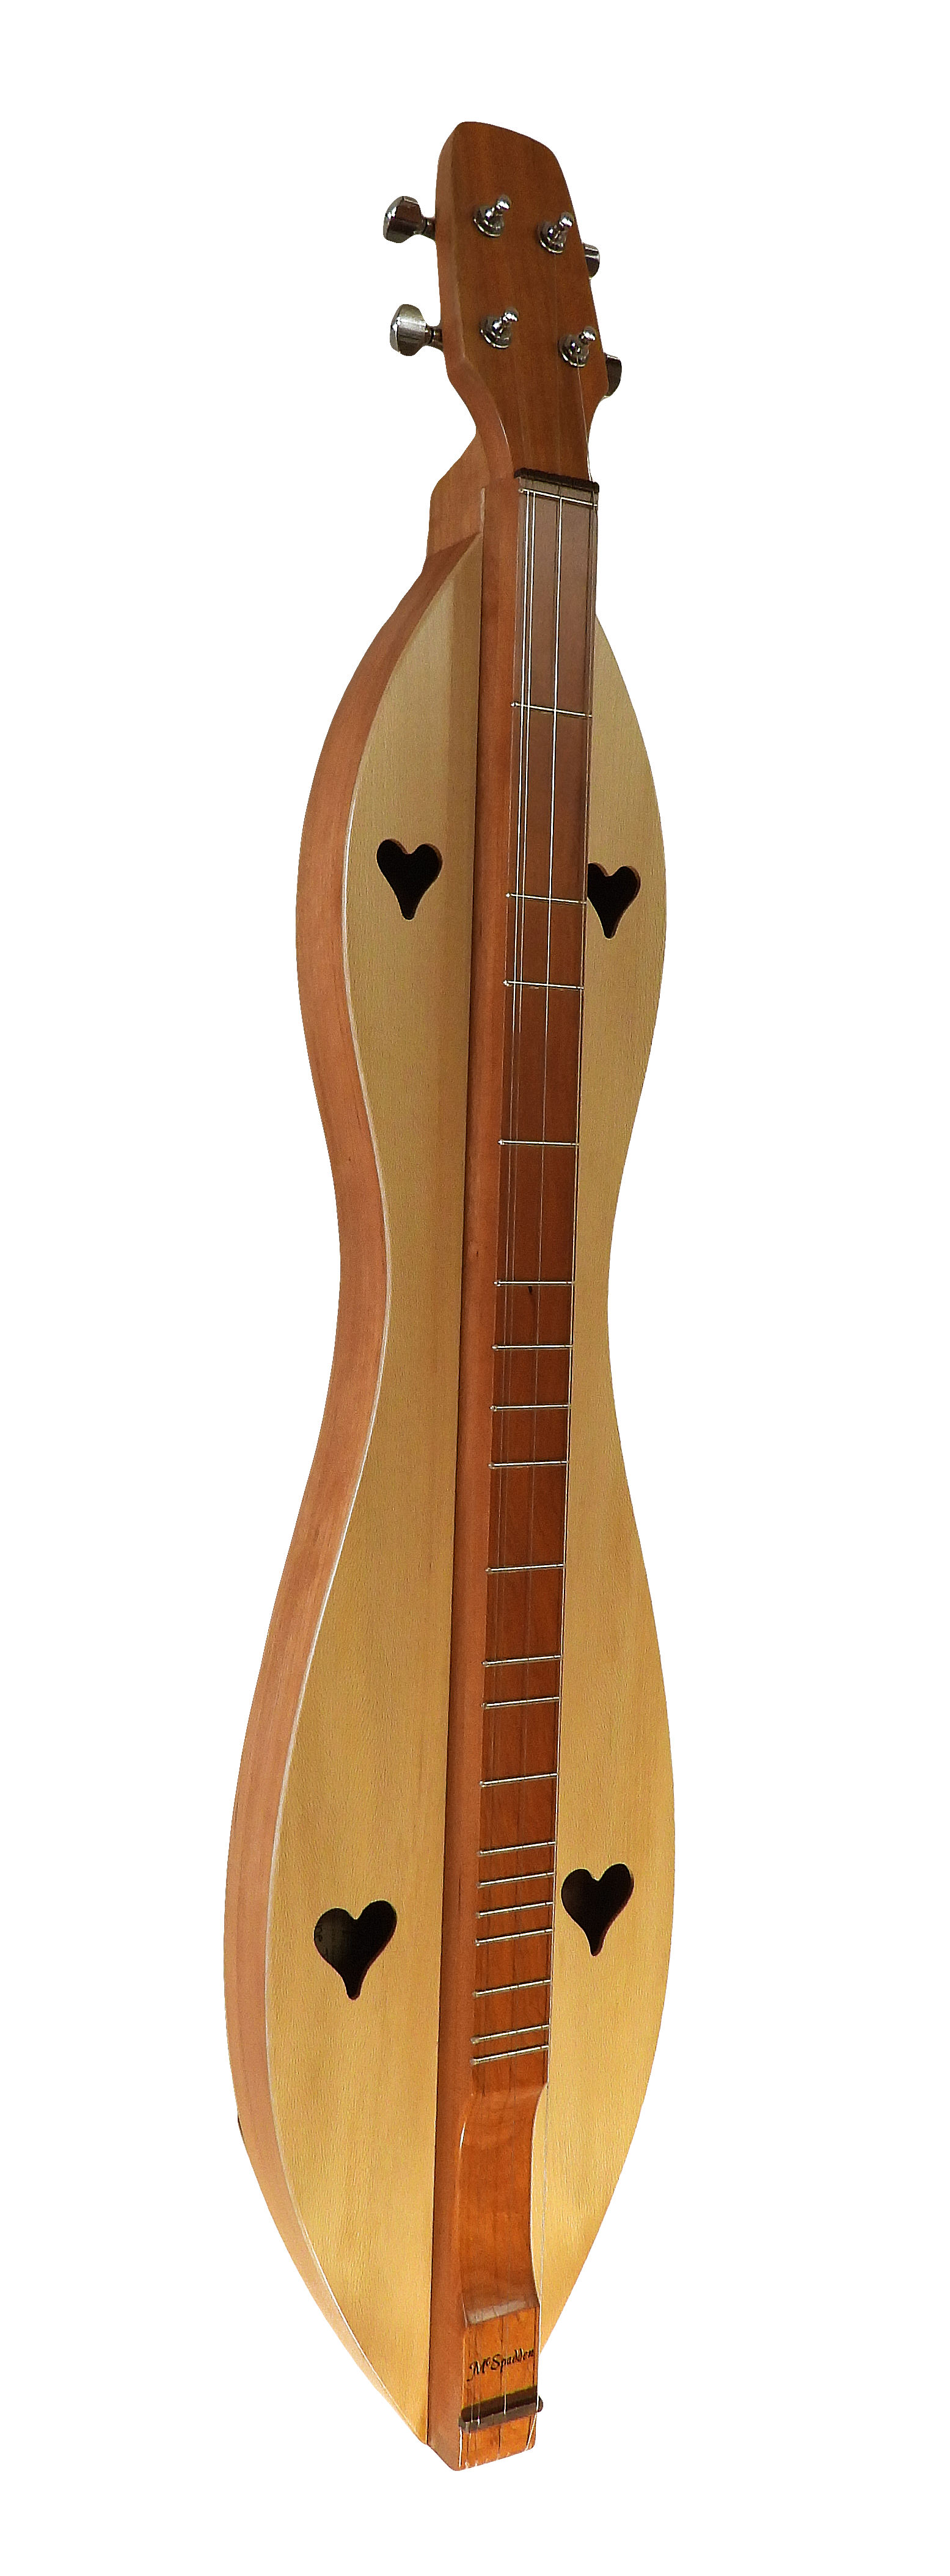 4 String, Flathead, Hourglass with Cherry back, sides and Spalted, Clear or Quartersawn Sycamore top. (4FHCSY)